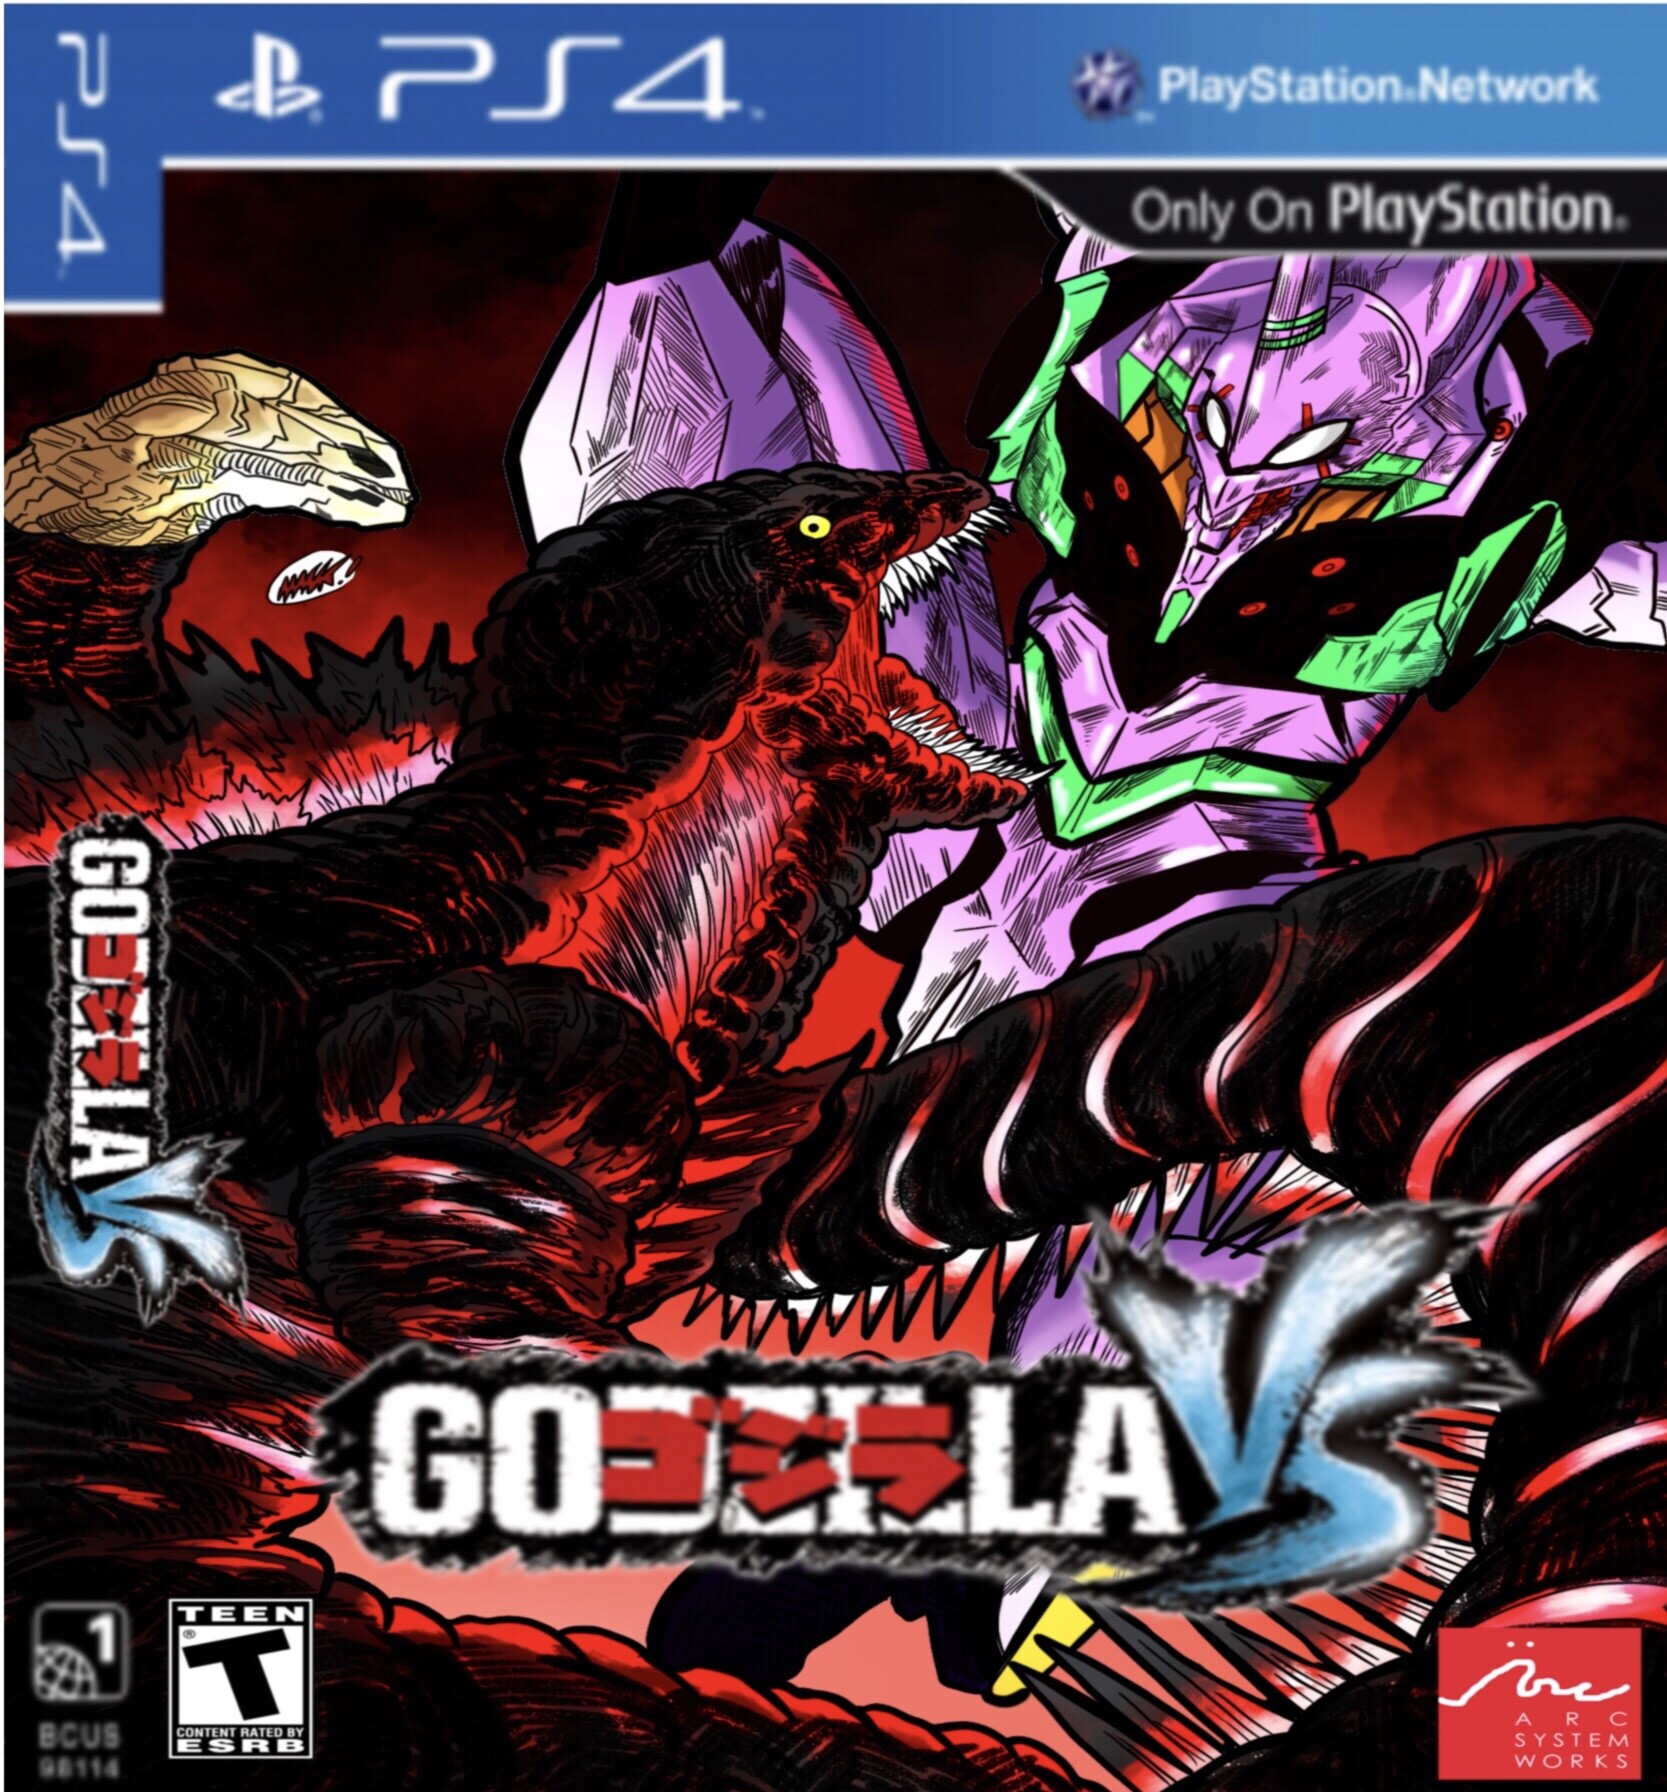 how much is godzilla ps4